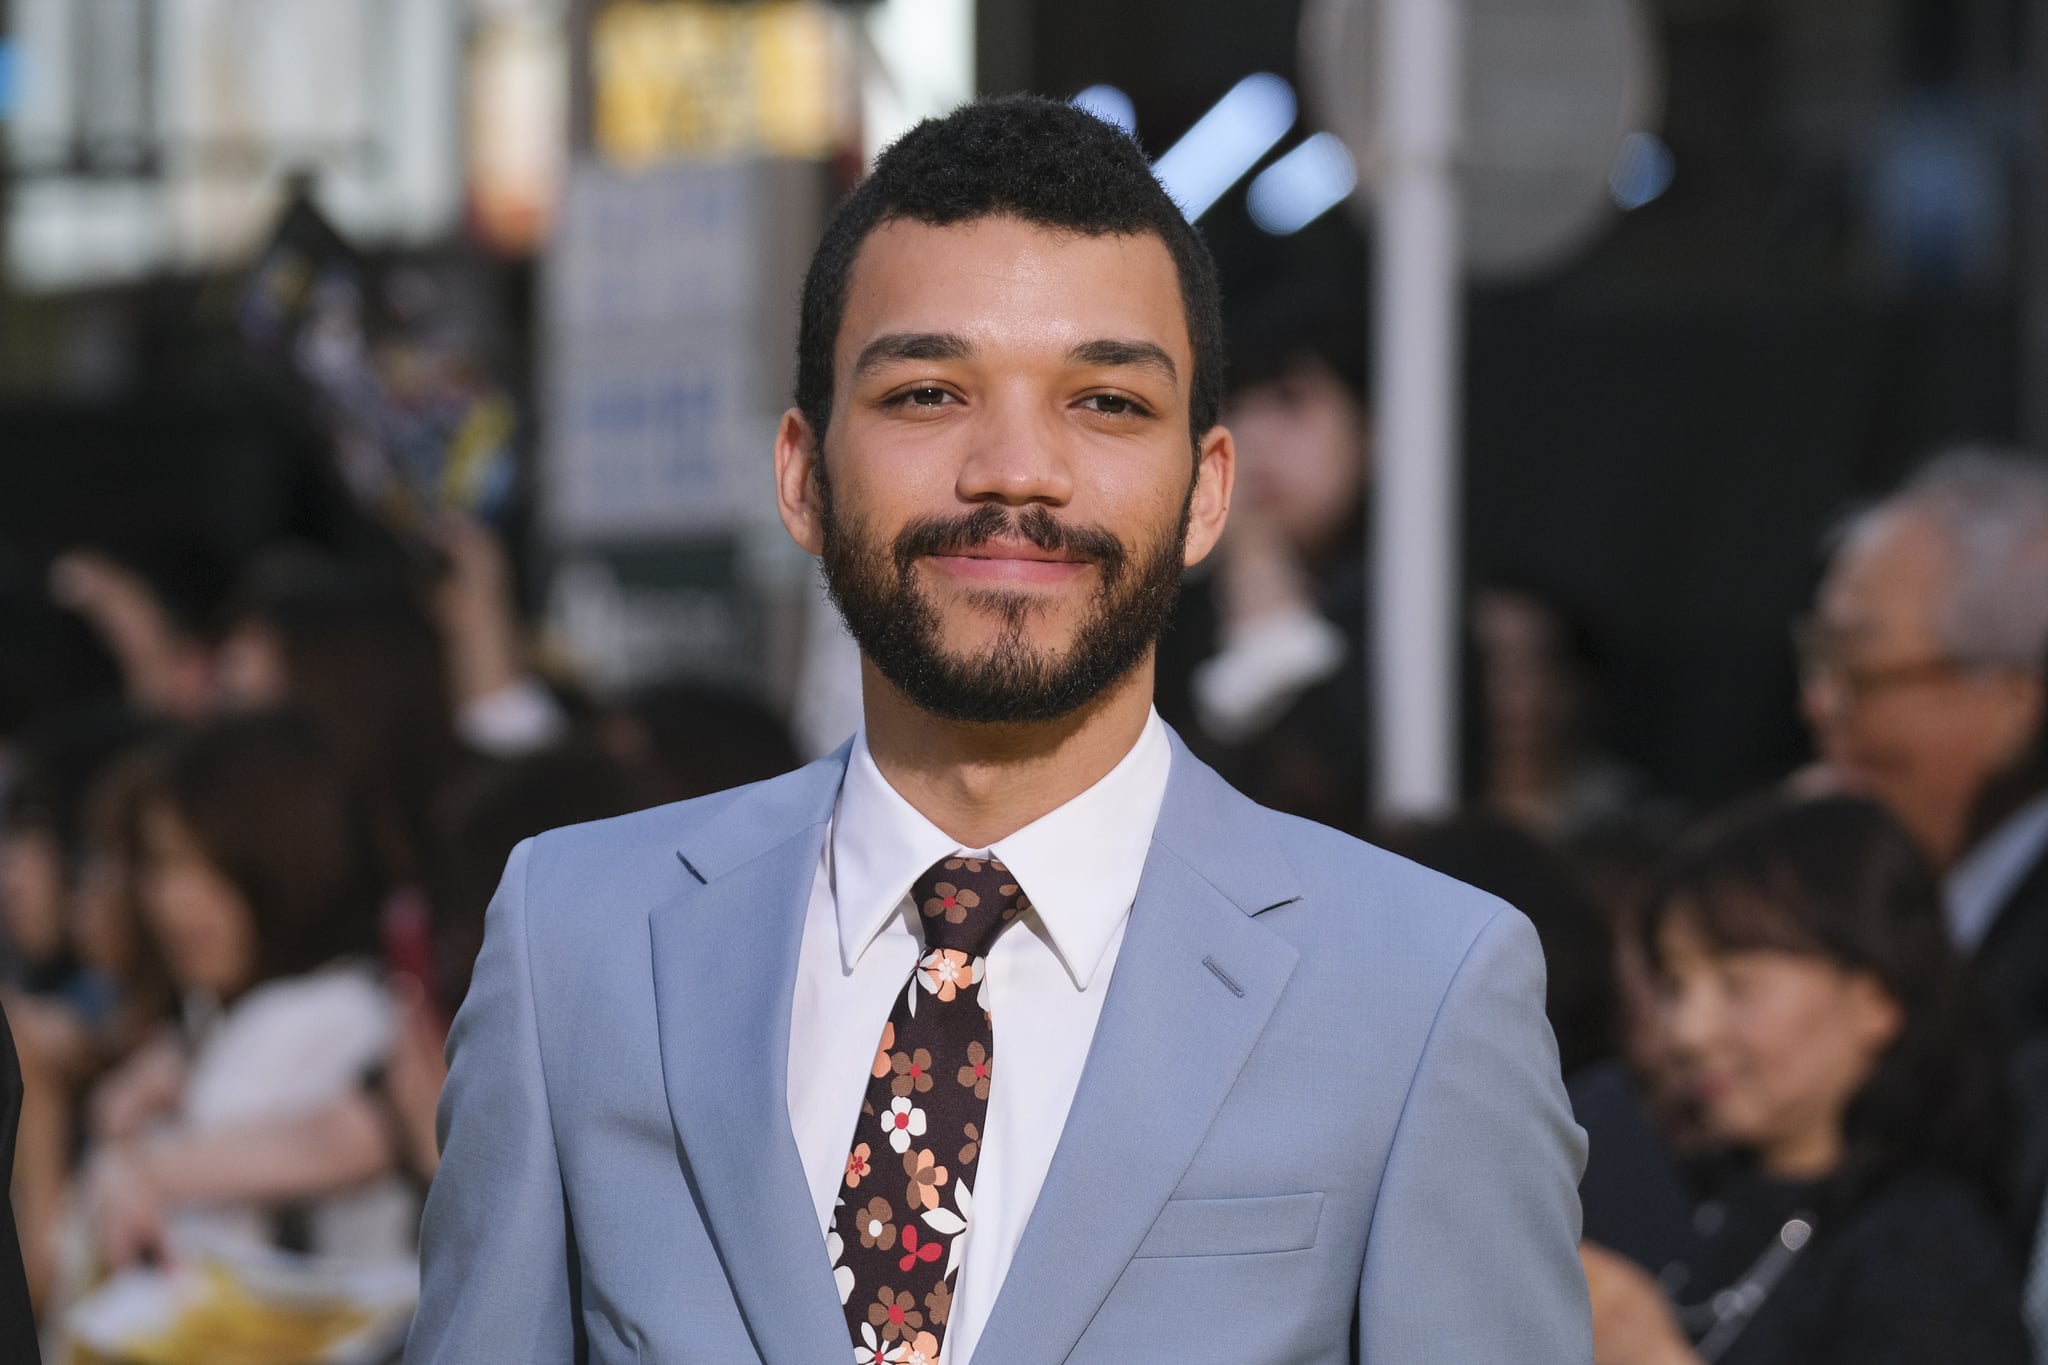 TOKYO, JAPAN - APRIL 25:  Actor Justice Smith attends the world premiere of 'Pokemon Detective Pikachu' on April 25, 2019 in Tokyo, Japan. (Photo by Keith Tsuji/Getty Images)